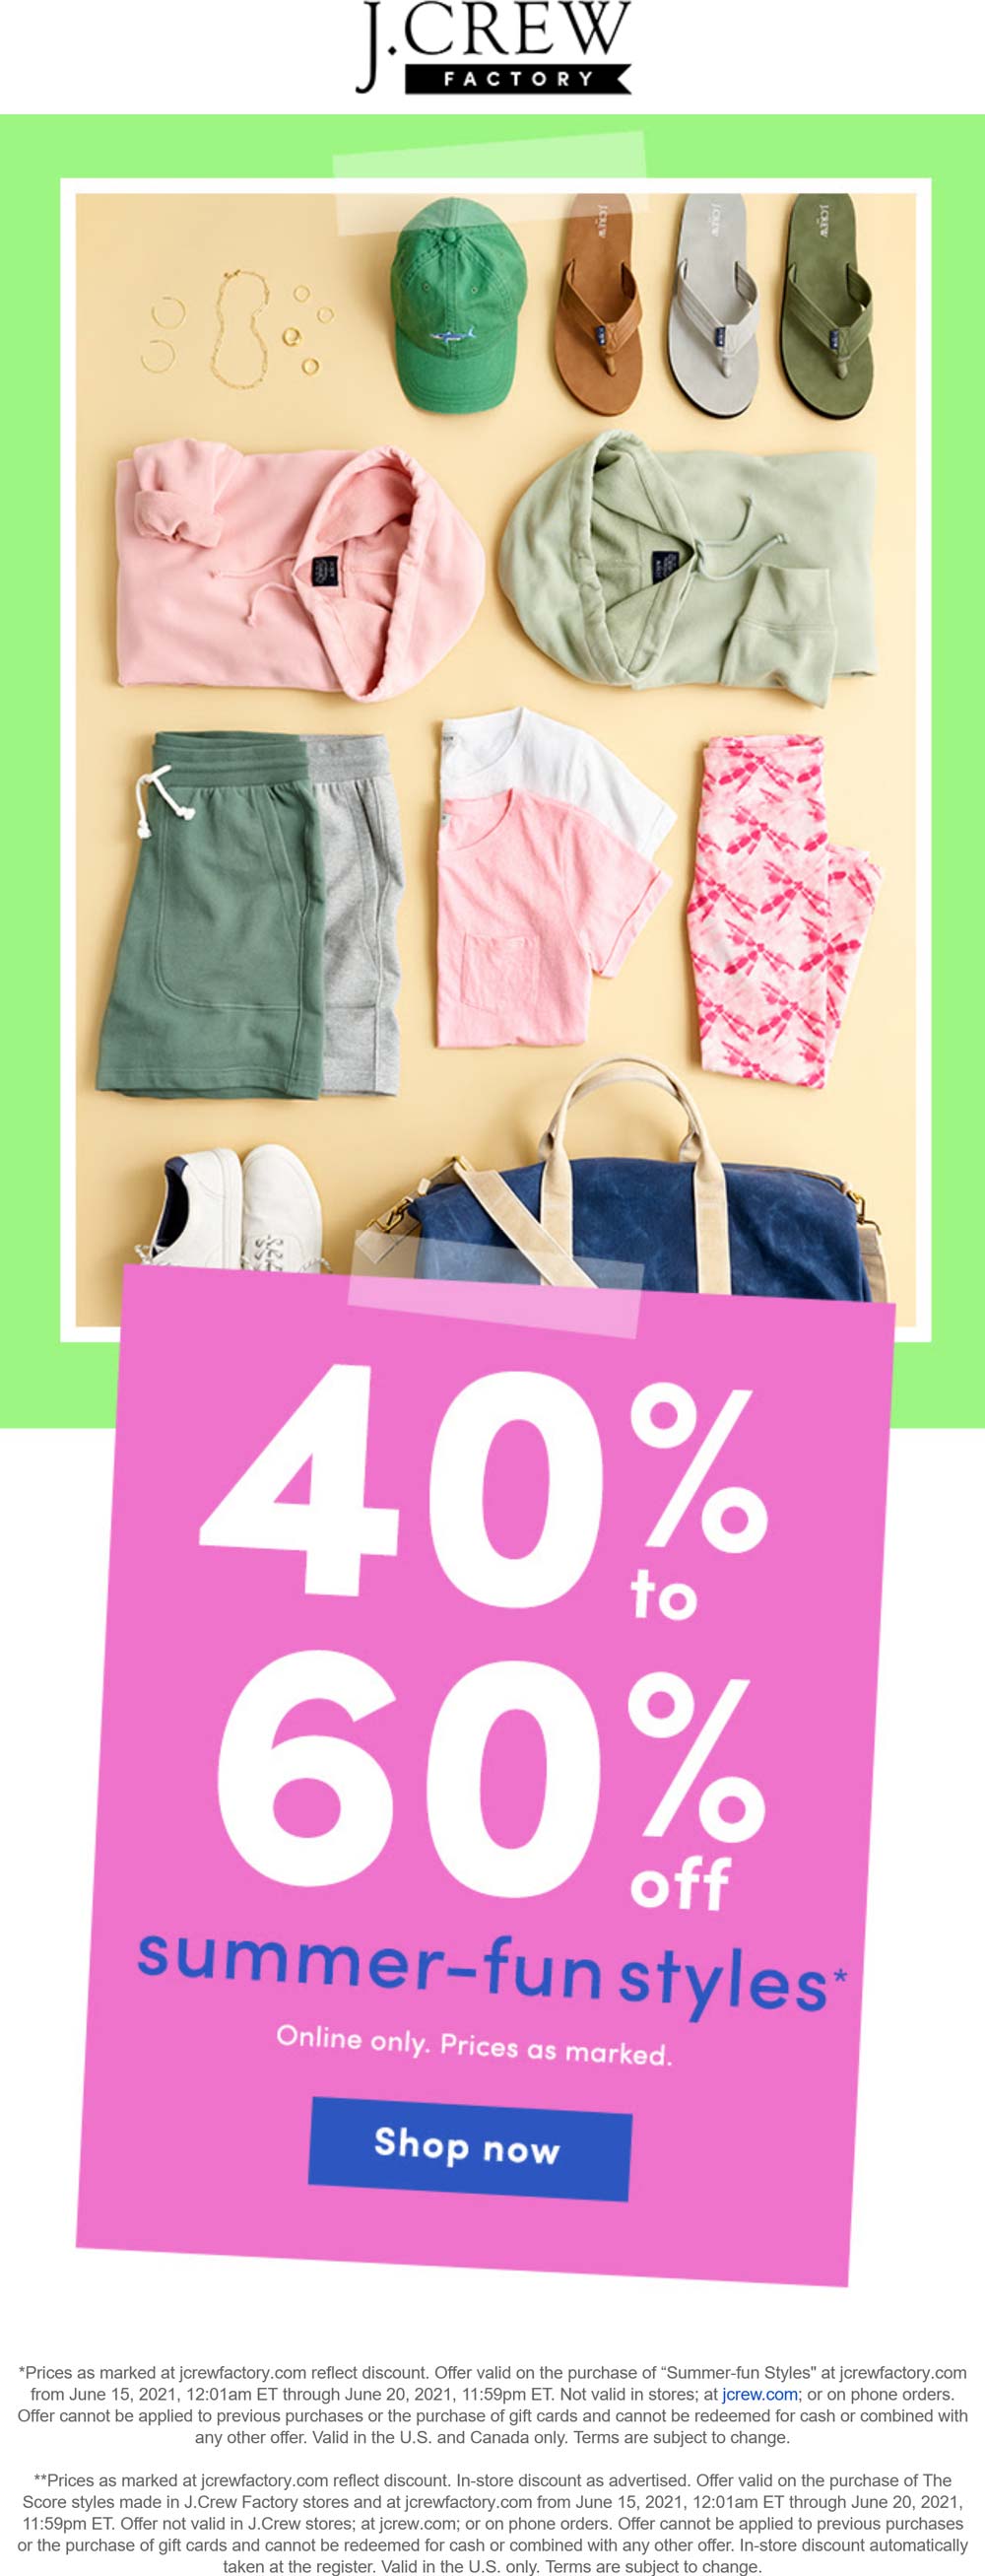 J.Crew Factory stores Coupon  40-60% off summer styles online at J.Crew Factory #jcrewfactory 